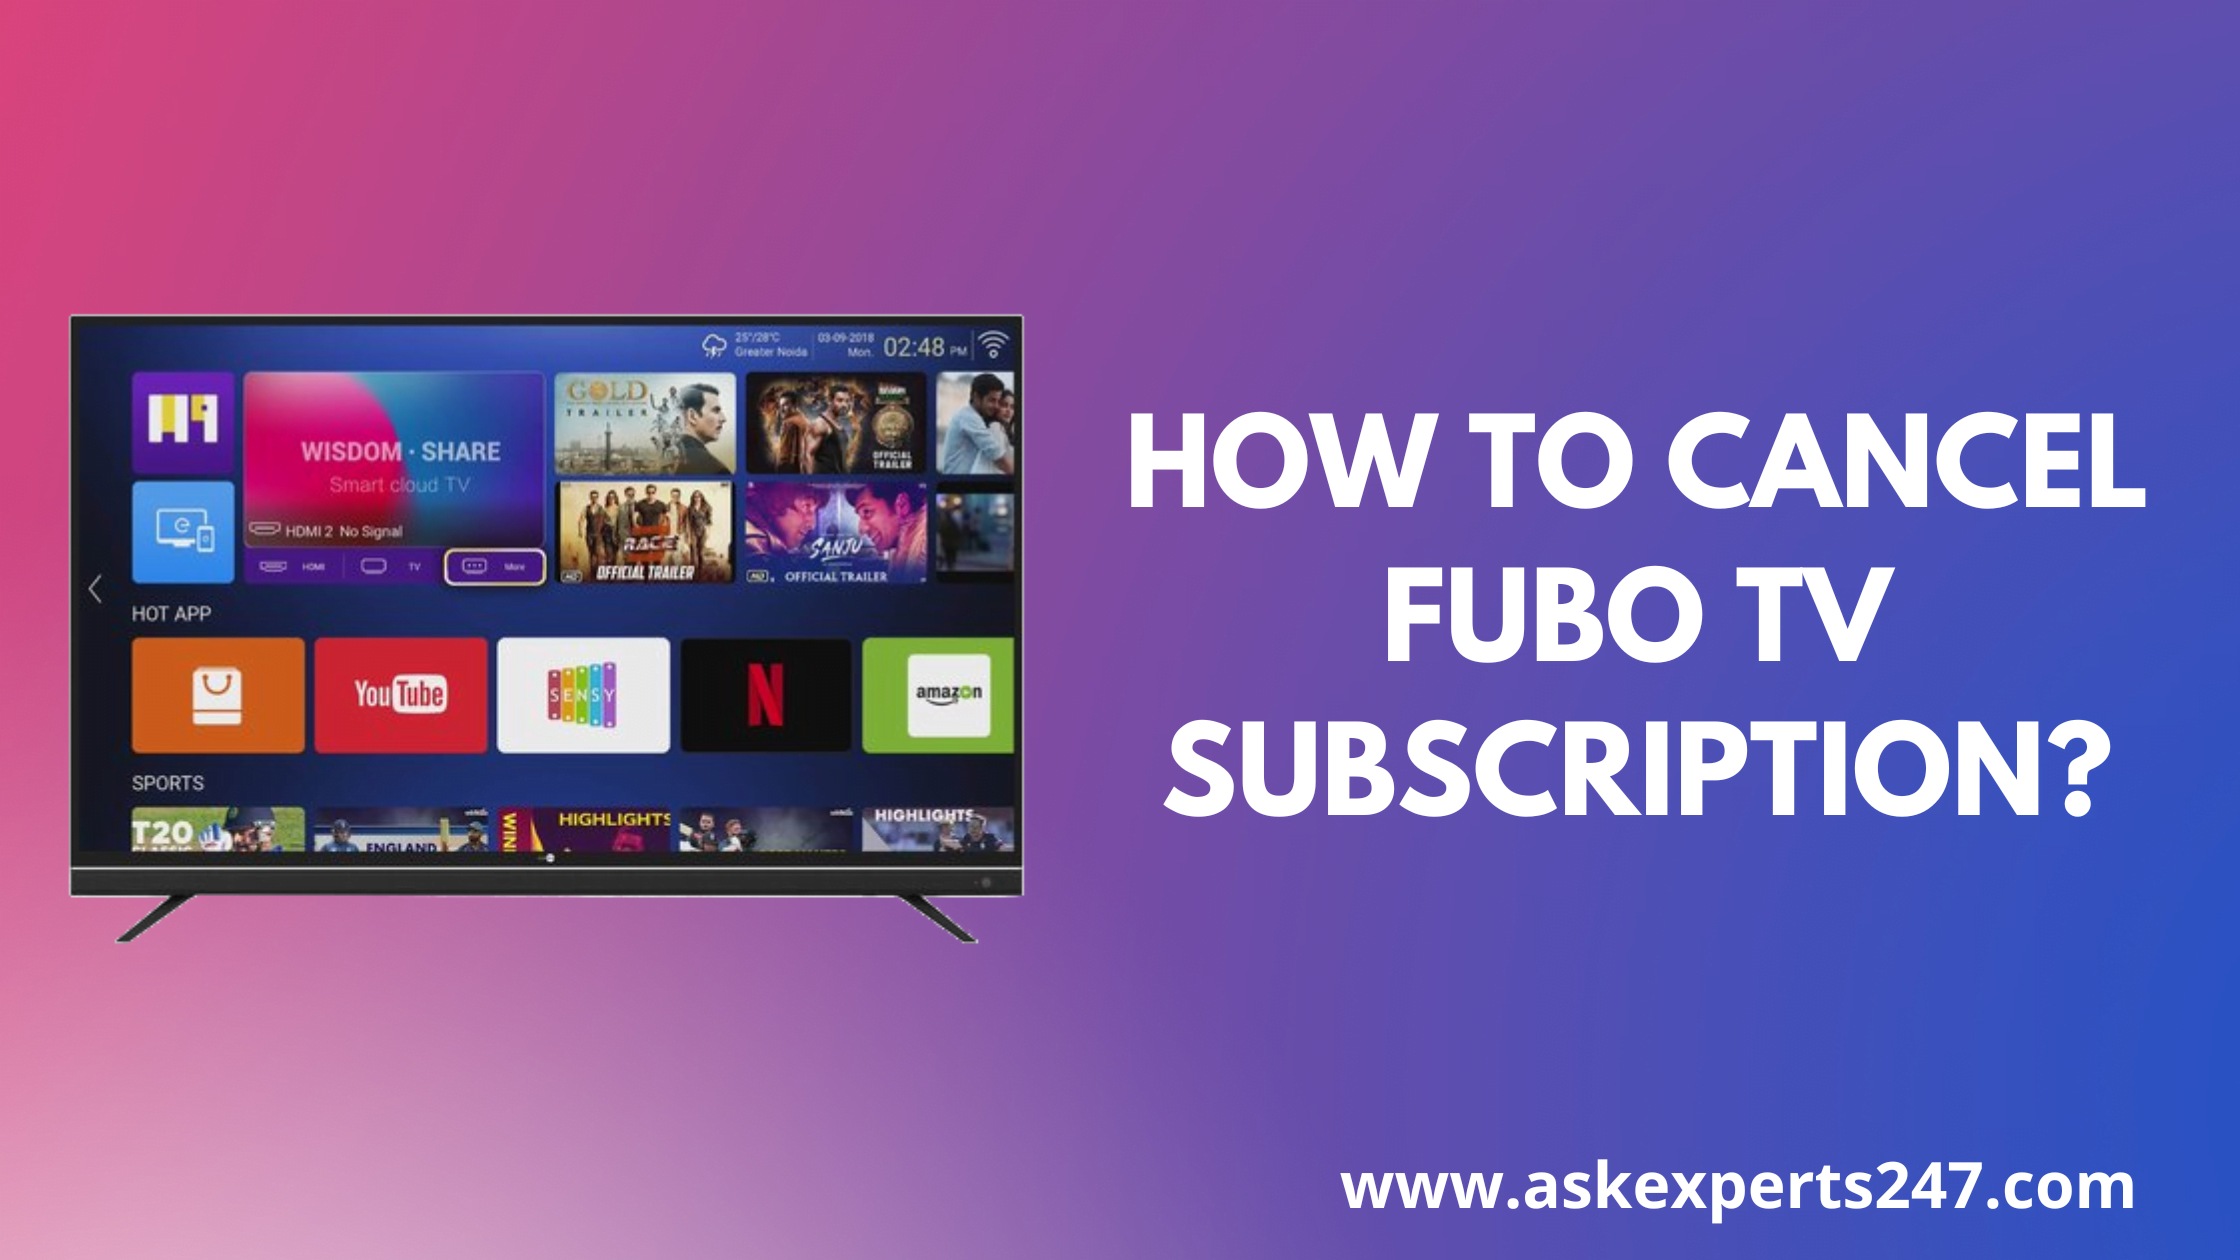 How to Cancel Fubo Tv Subscription